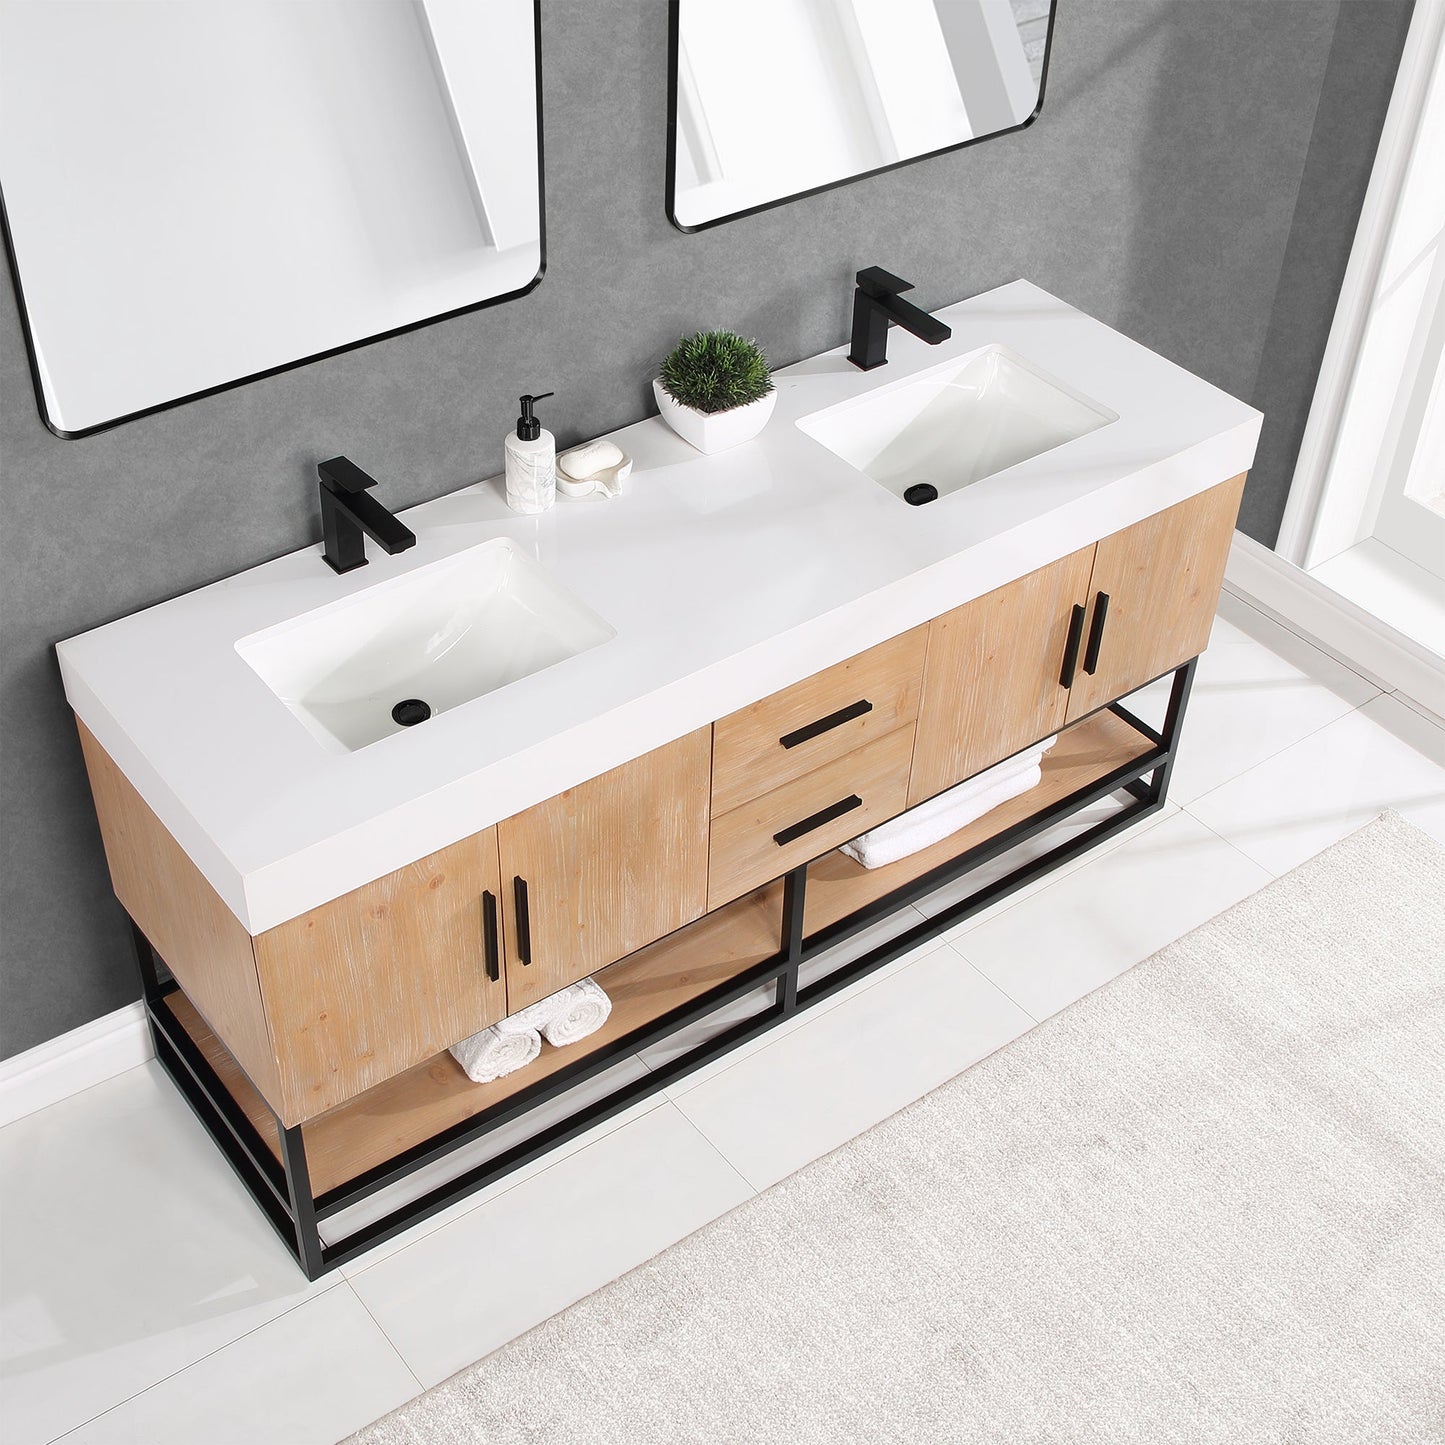 Bianco 72" Double Bathroom Vanity in Light Brown with Matte Black Support Base and White Composite Stone Countertop without Mirror